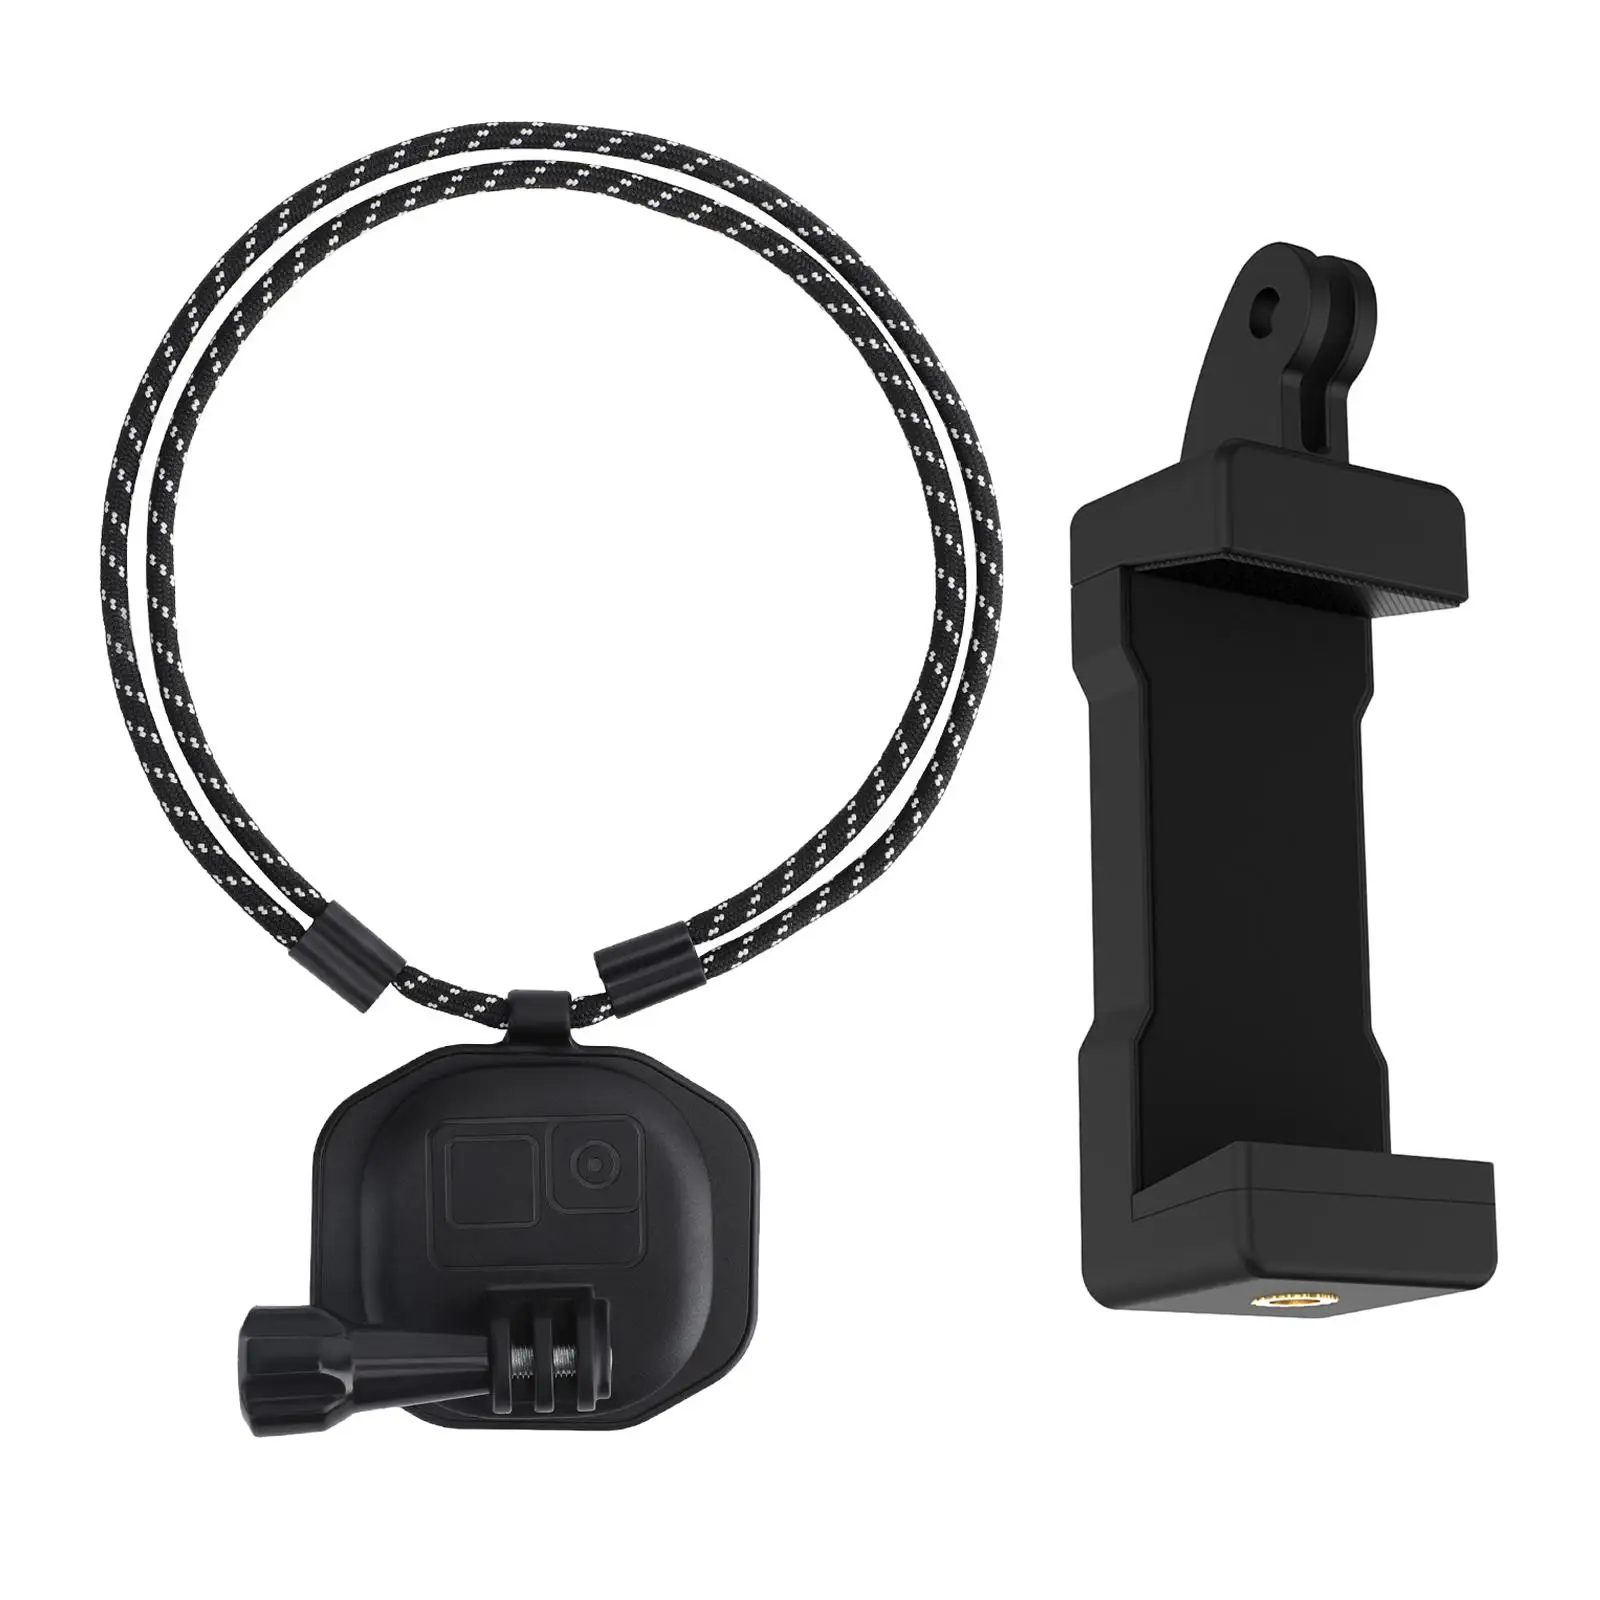 Chest Magnetic Neck Selfie Bracket with Adjustable Lanyard Chest Bracket Magnetic POV Neck Selfie Holder for Action Camera